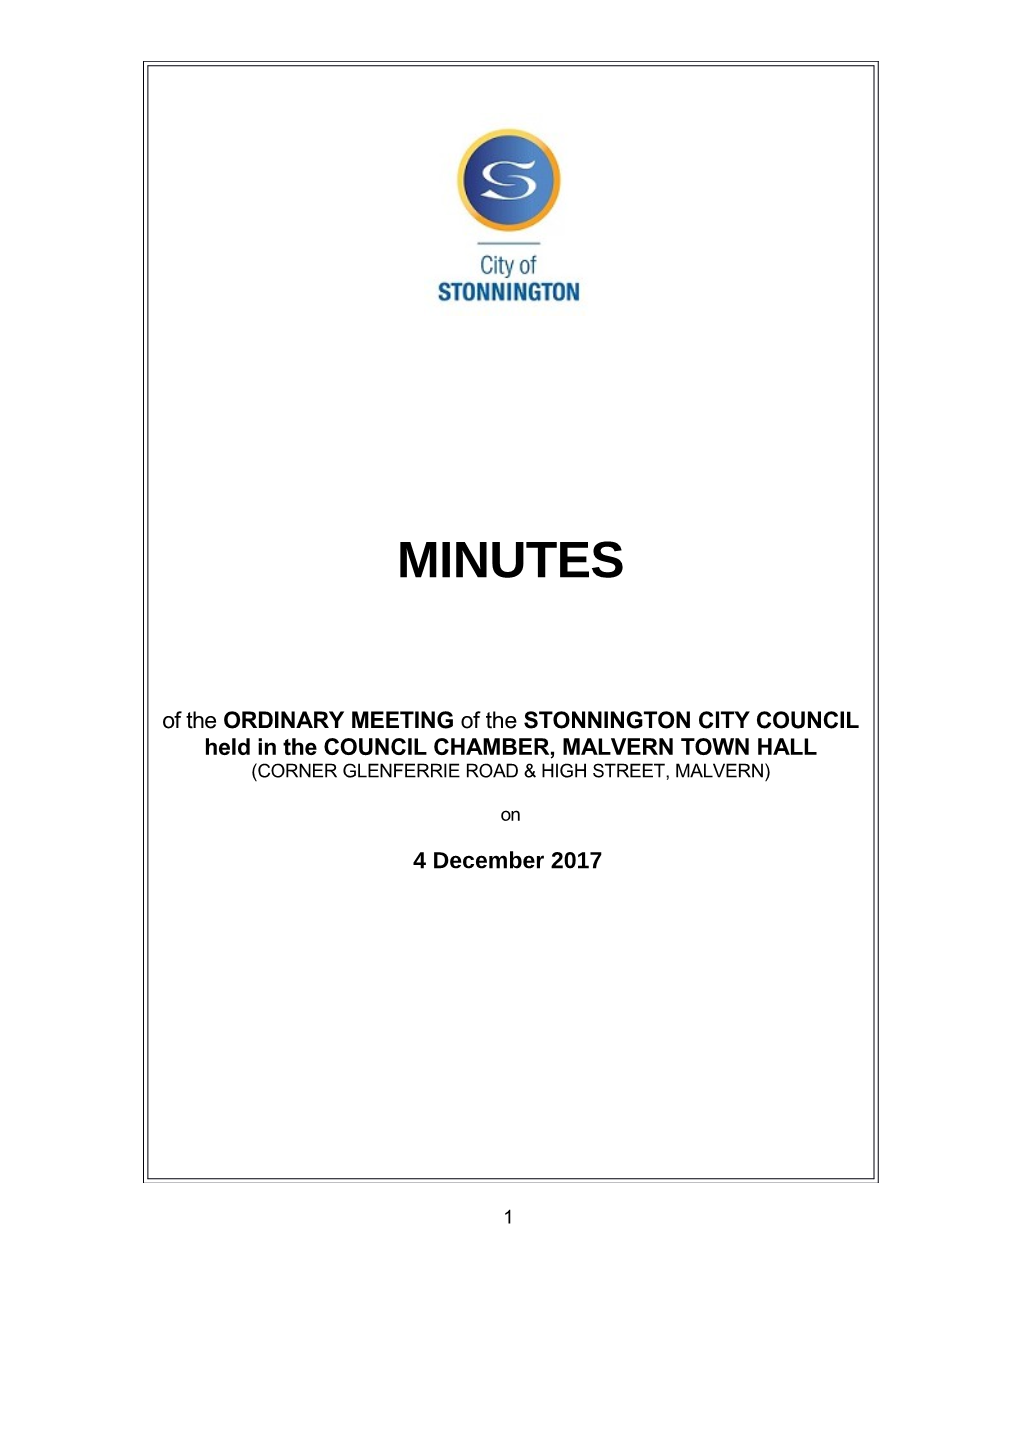 Minutes of Council Meeting - 4 December 2017